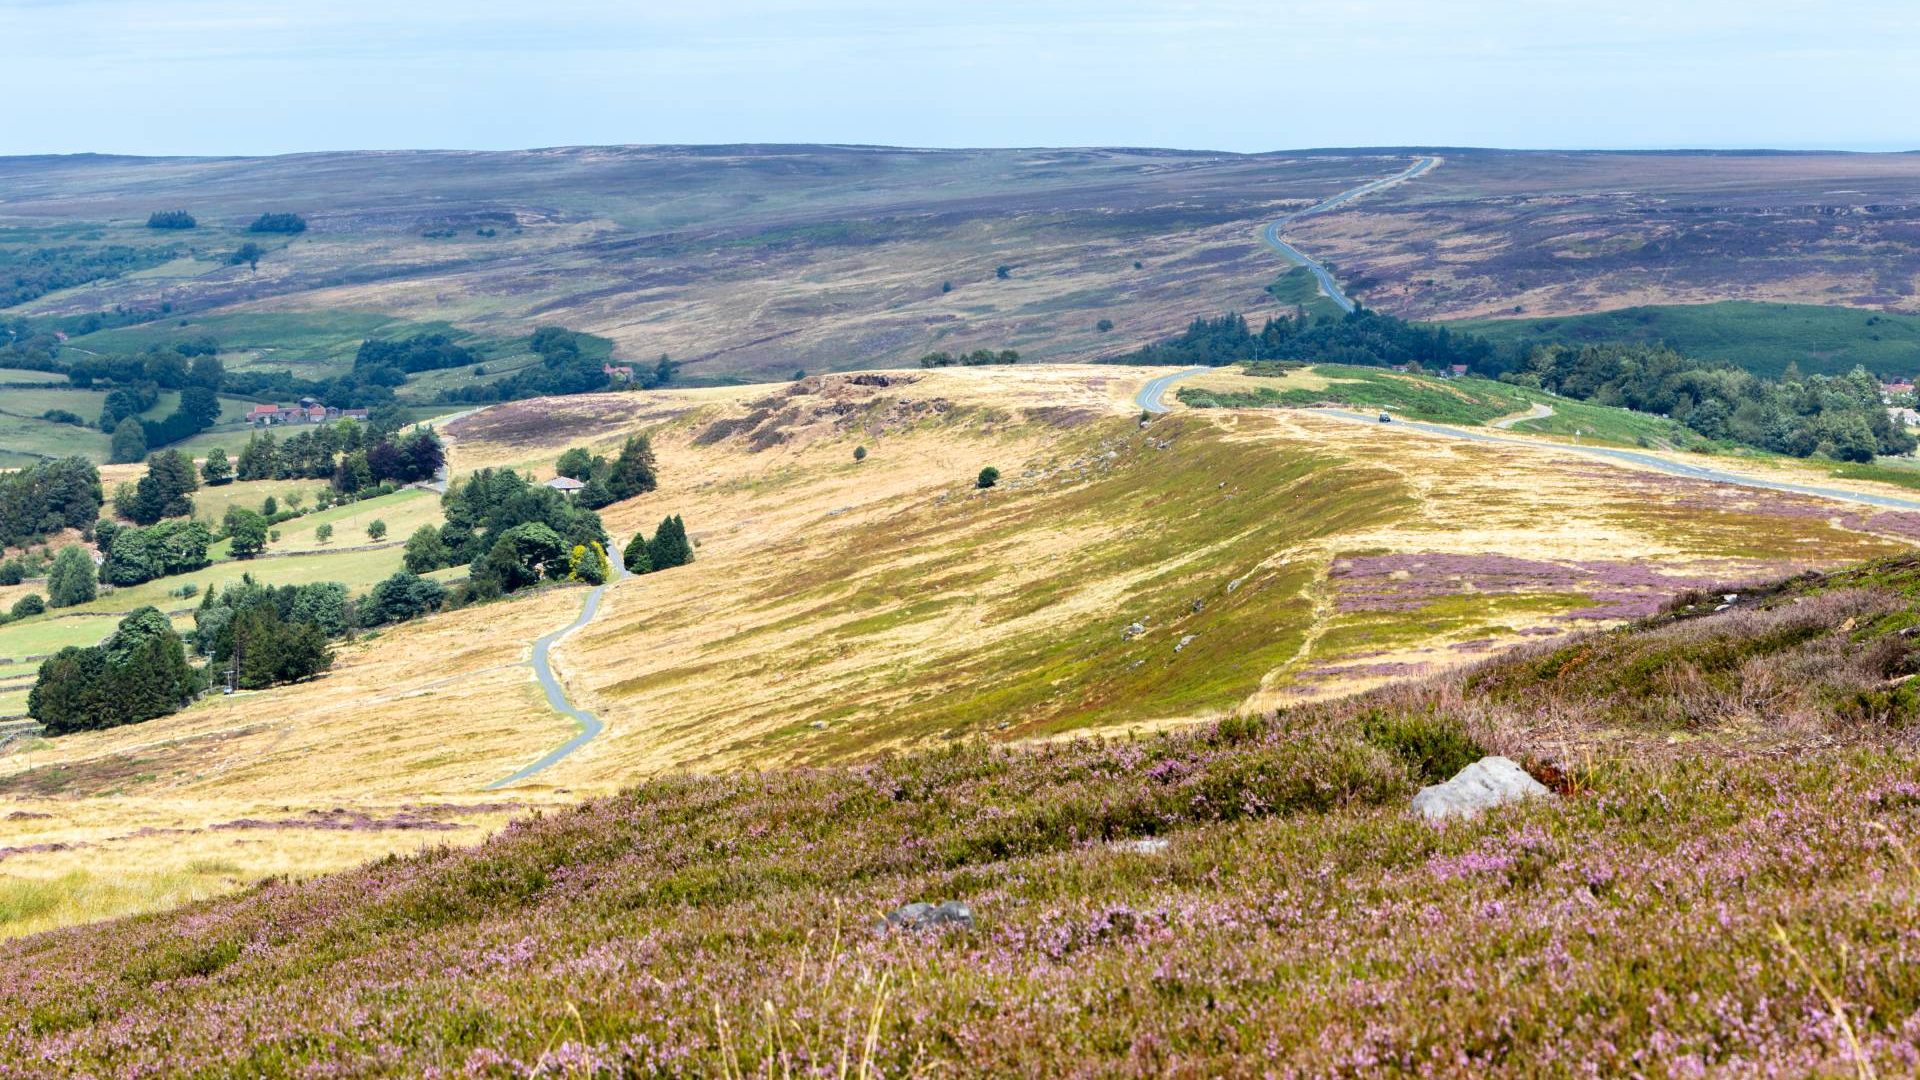 View over the hills in North York Moors